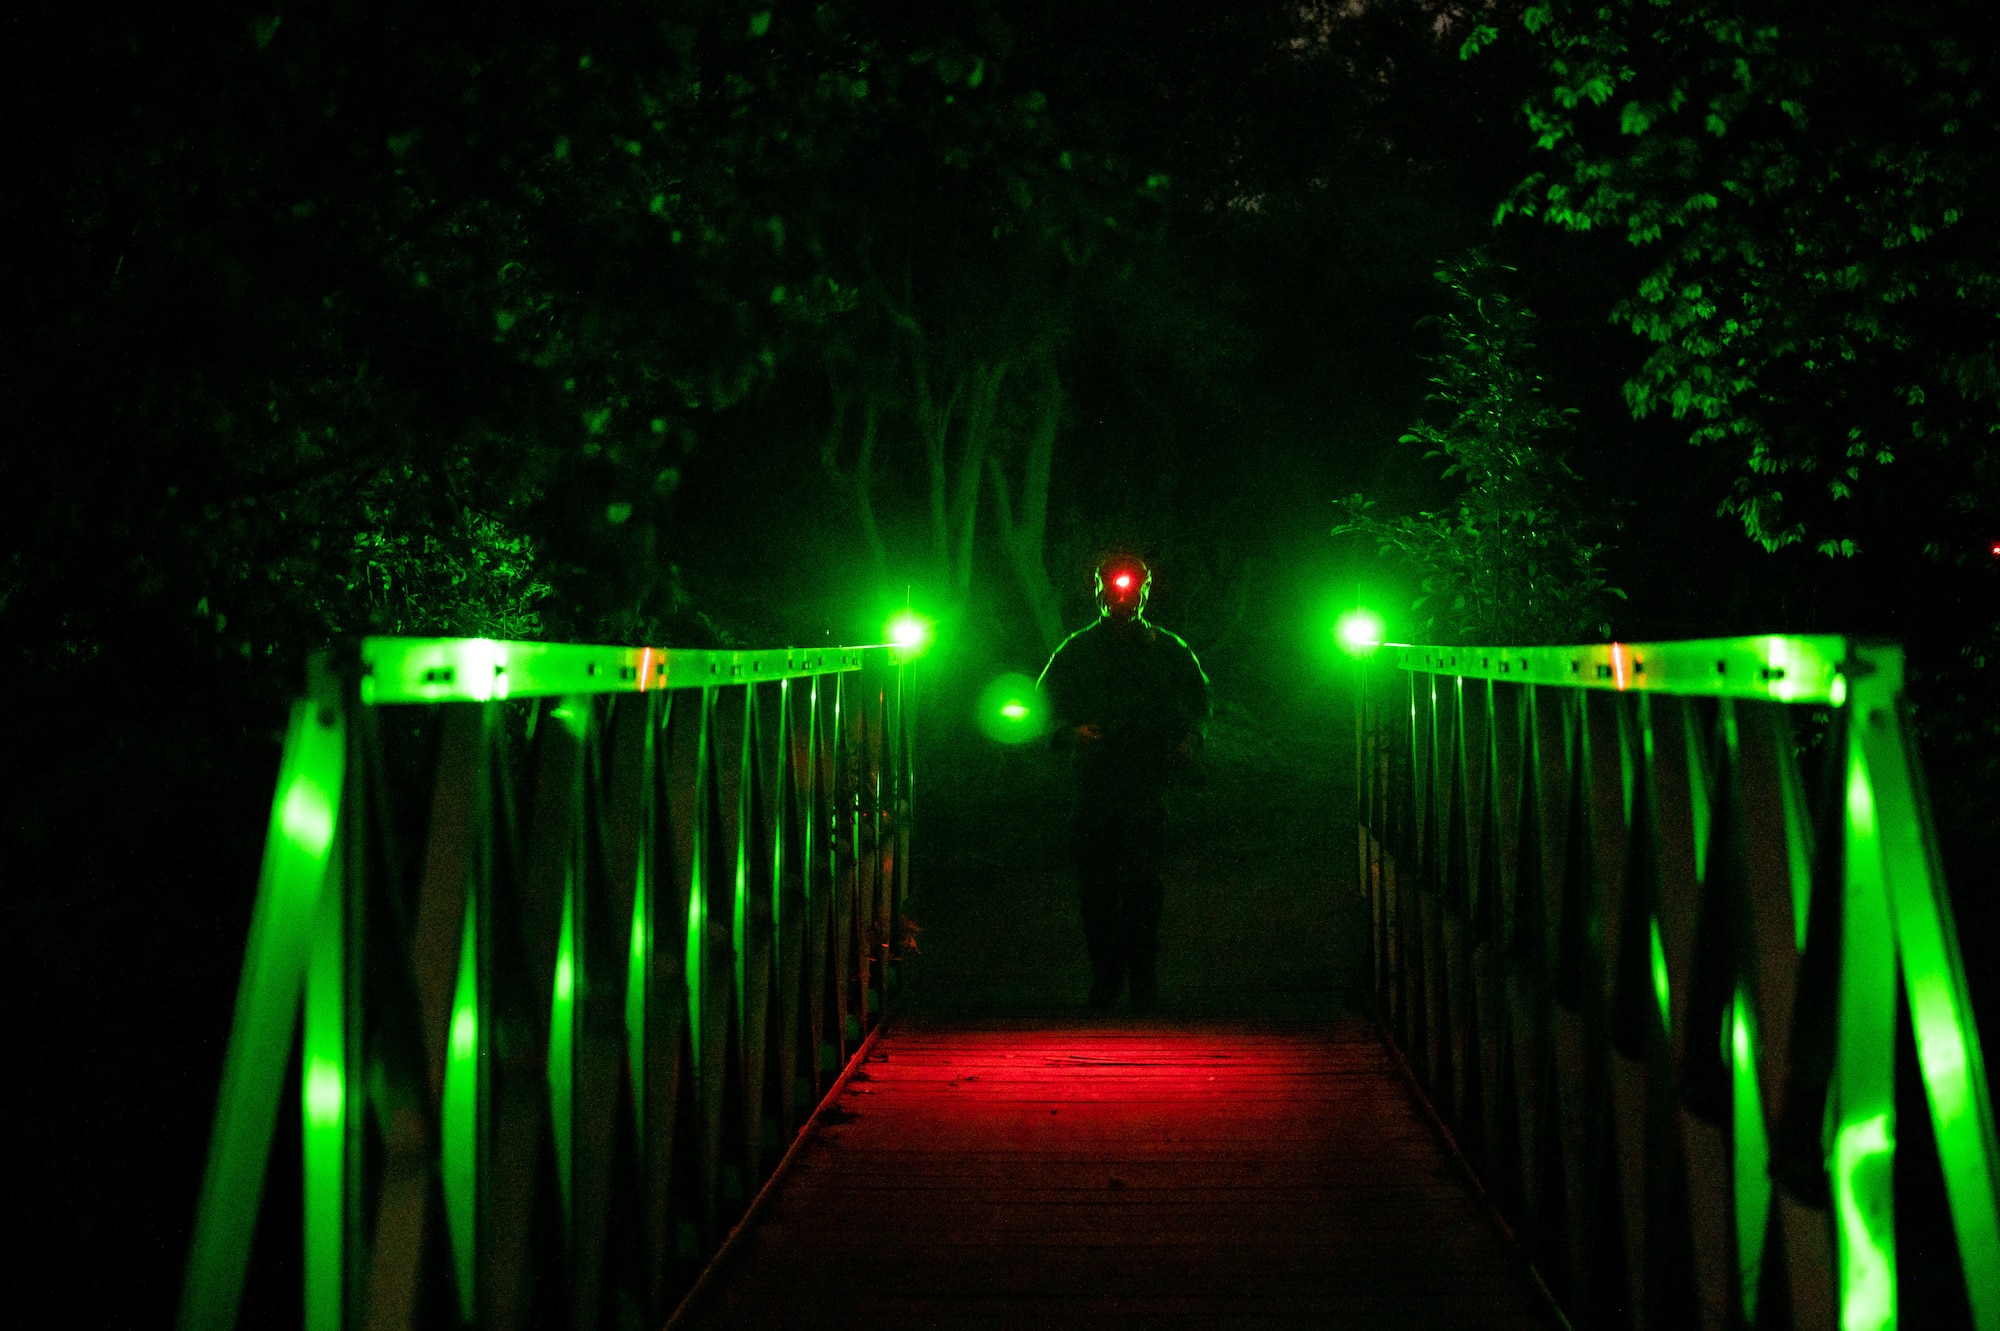 Airman runs through the darkness with a red headlamp across a bridge illuminated in green lights